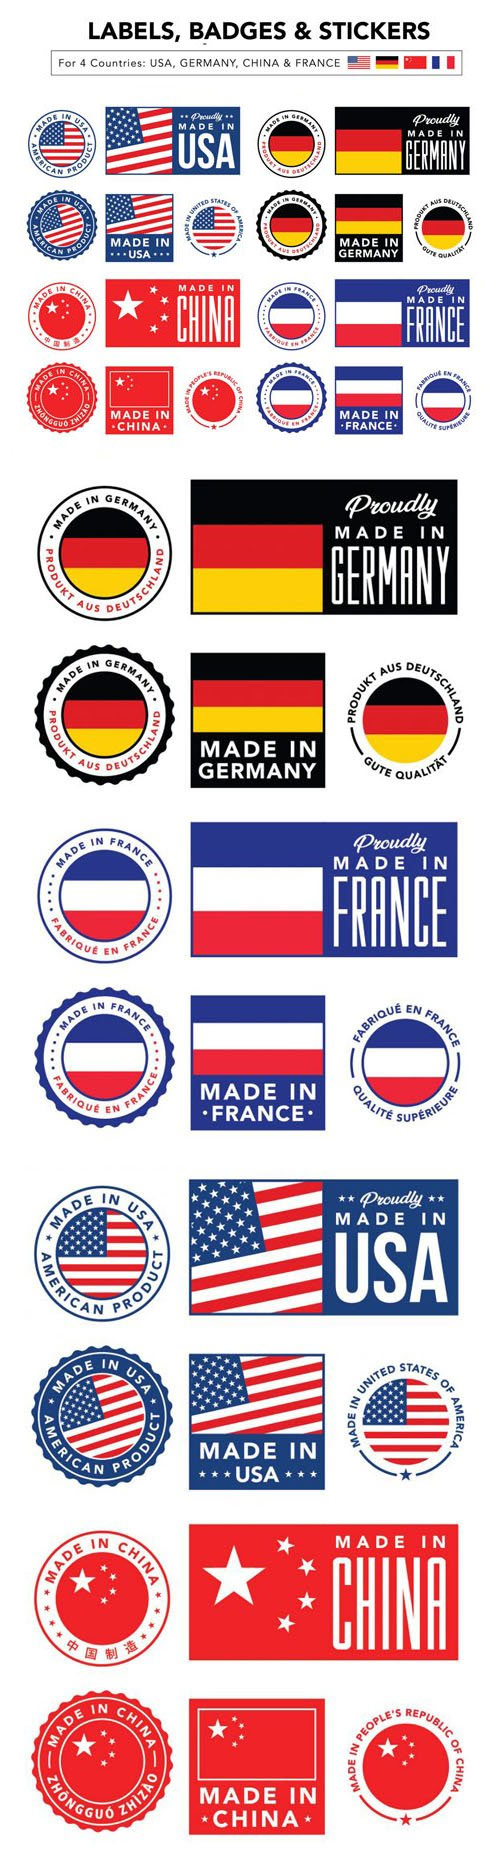 Made in USA, Germany, China & France Labels, Badges & Stickers in Vector